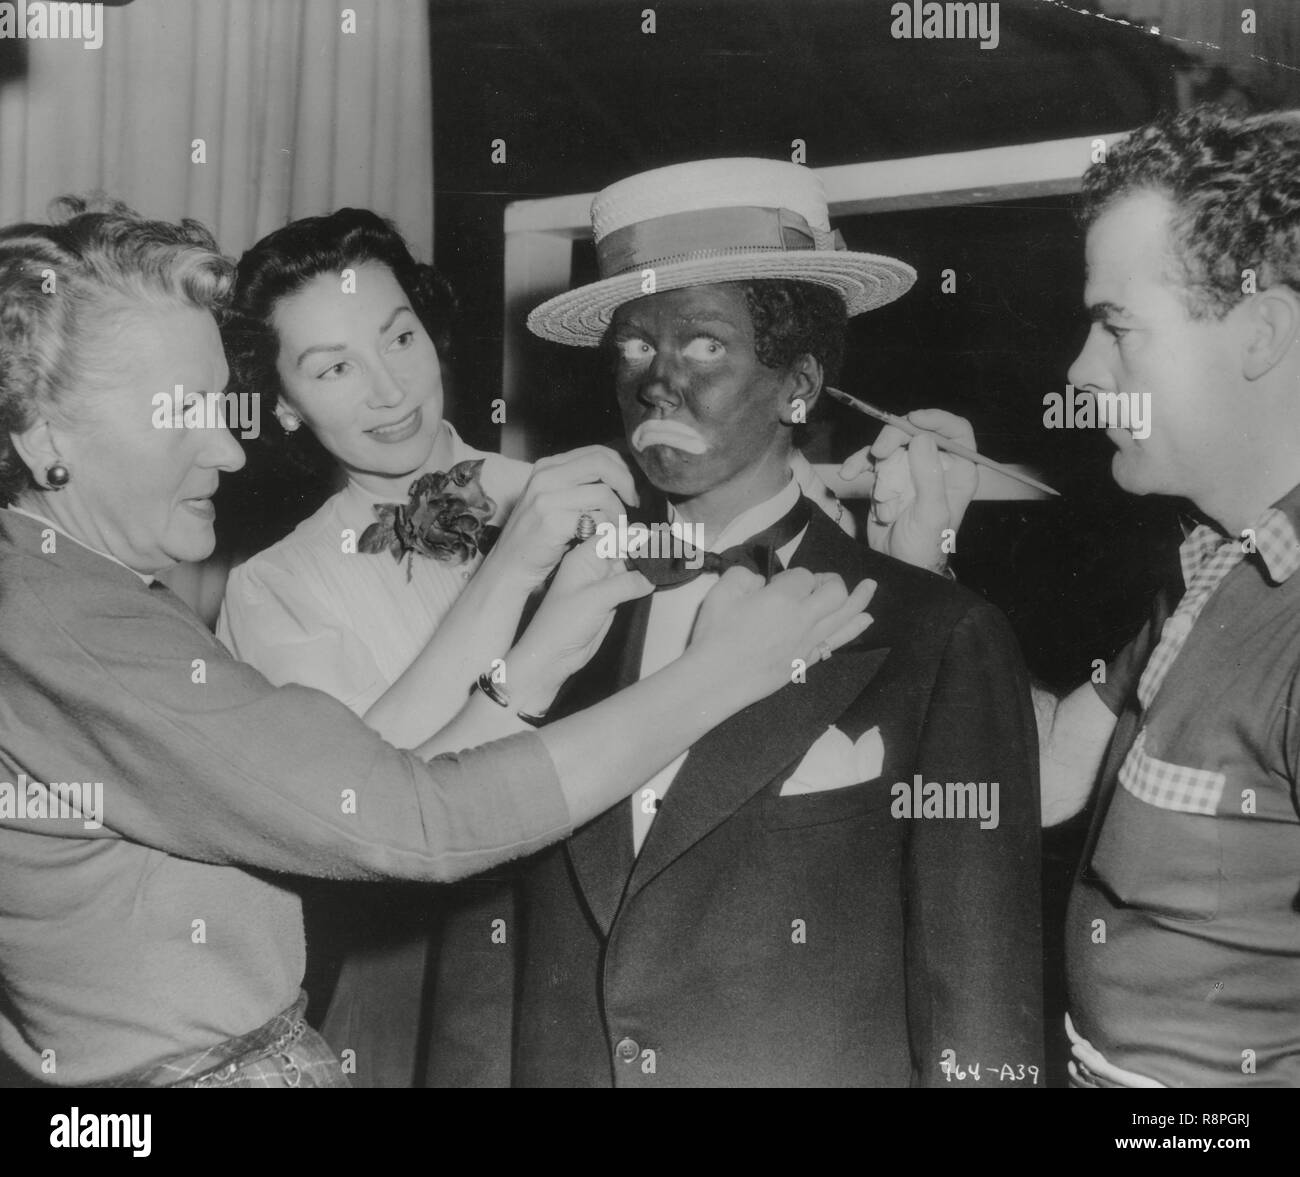 Doris Day, during a makeup session, applying black-face minstrel makeup for the film, 'I'll See You in My Dreams' (1951) Warner Bros.  File Reference # 33635 665THA Stock Photo